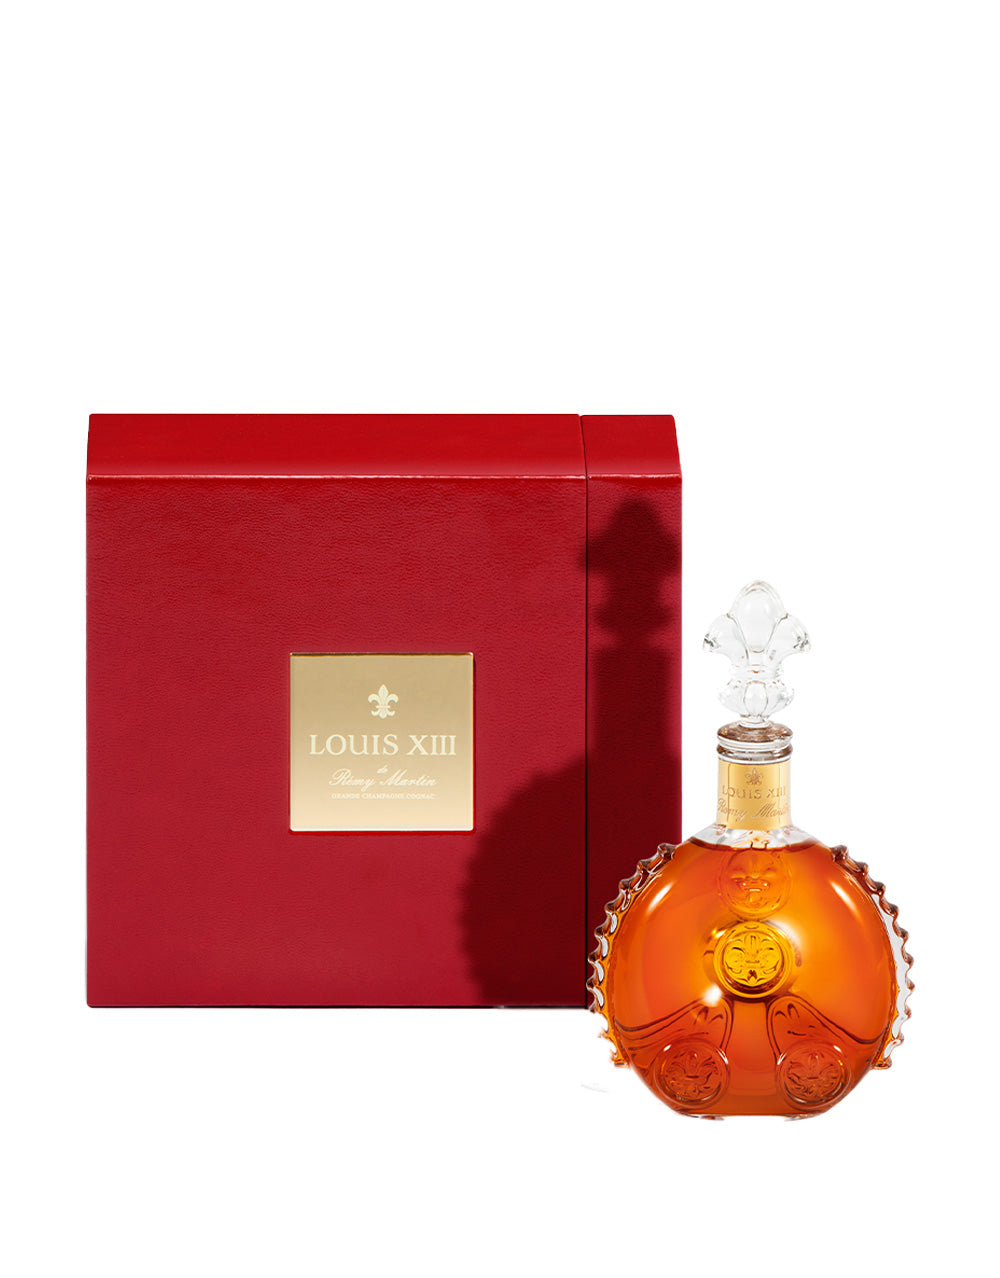 LOUIS XIII: The Miniature Price & Reviews